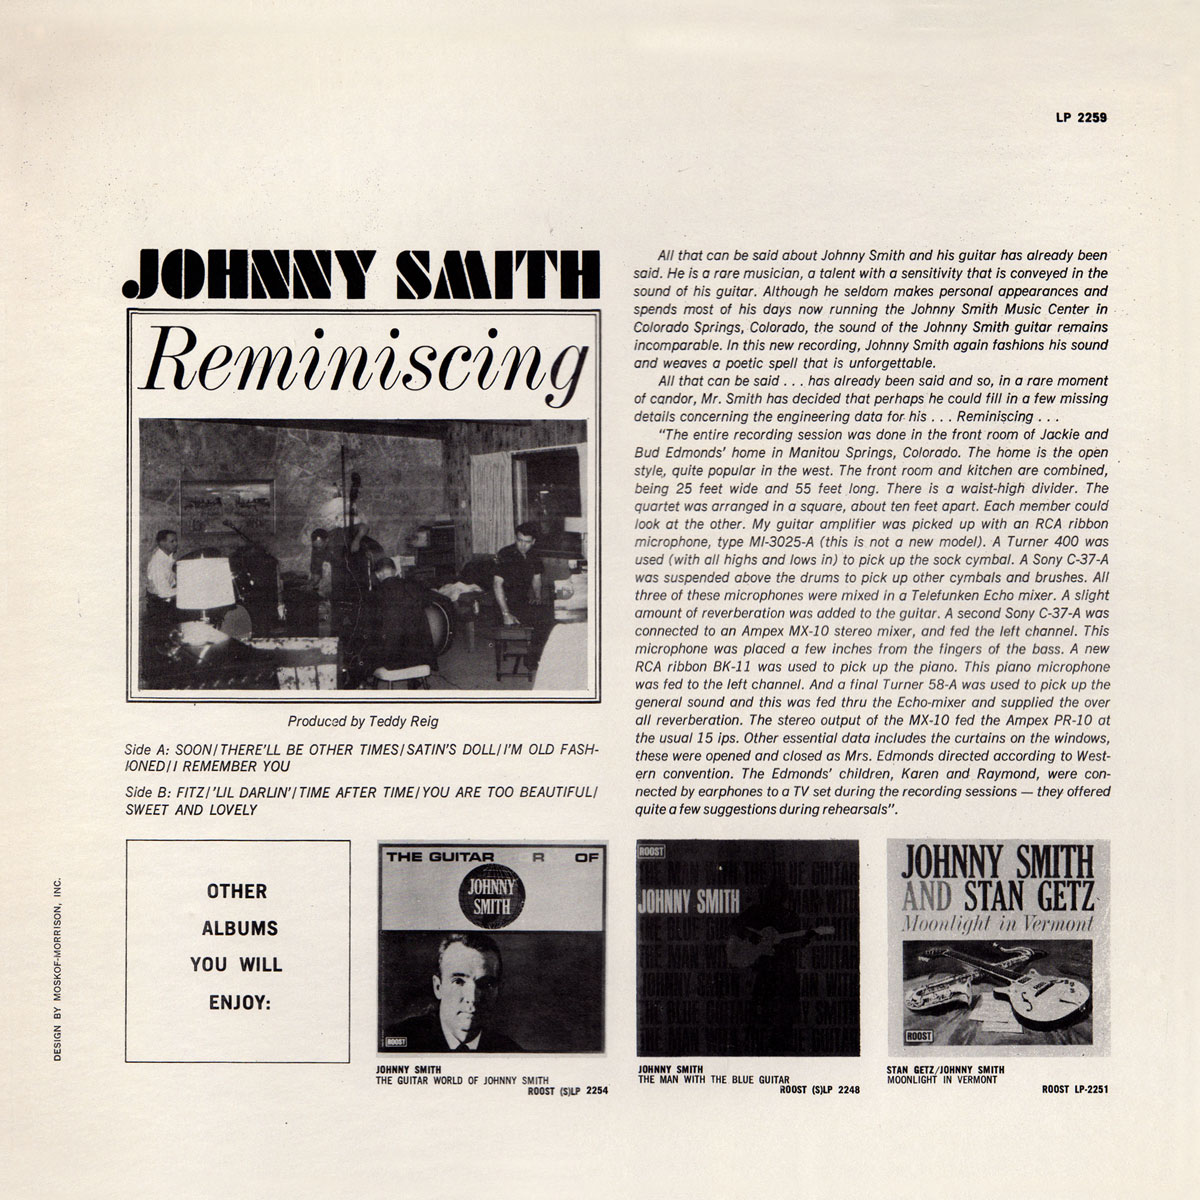 Johnny Smith - Reminiscing - Back cover